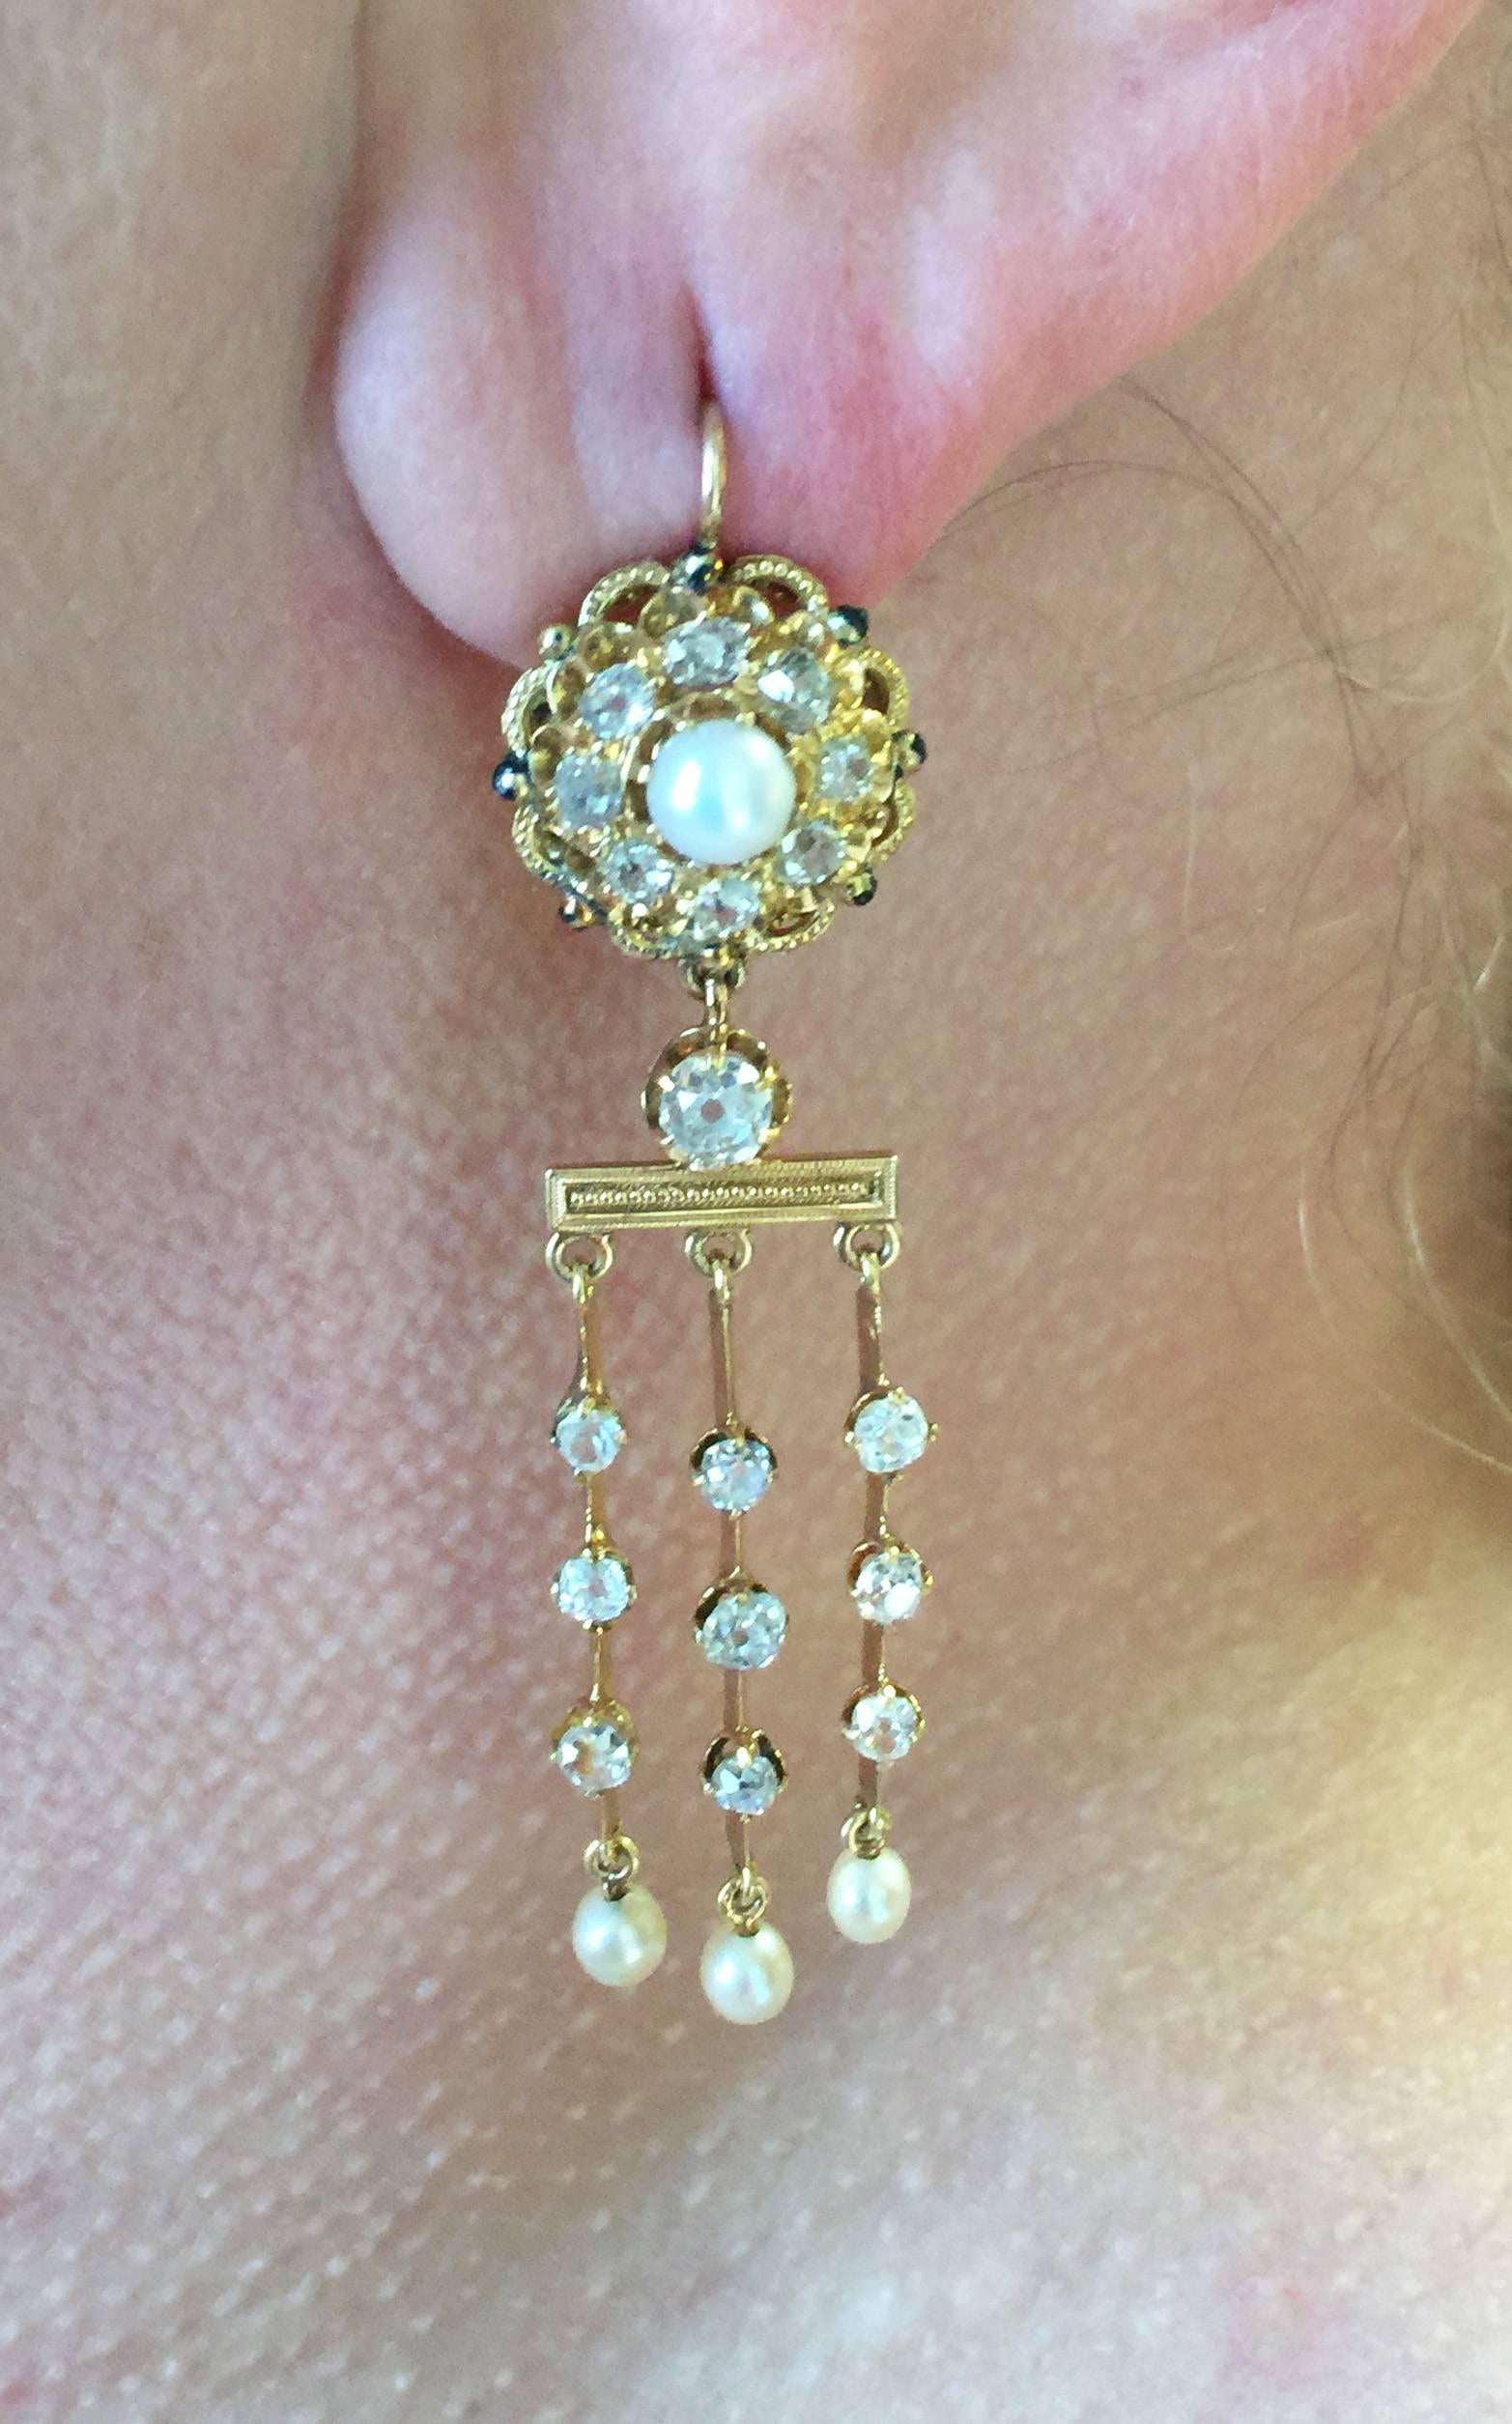 Lovely 18kt. yellow gold diamond and pearl dangle earrings. Each handmade earring measures approx 2.5 inches in length and is set at the top with a cluster of eight old mine cut diamonds with a fine natural 5.0mm. pearl center with black enamel